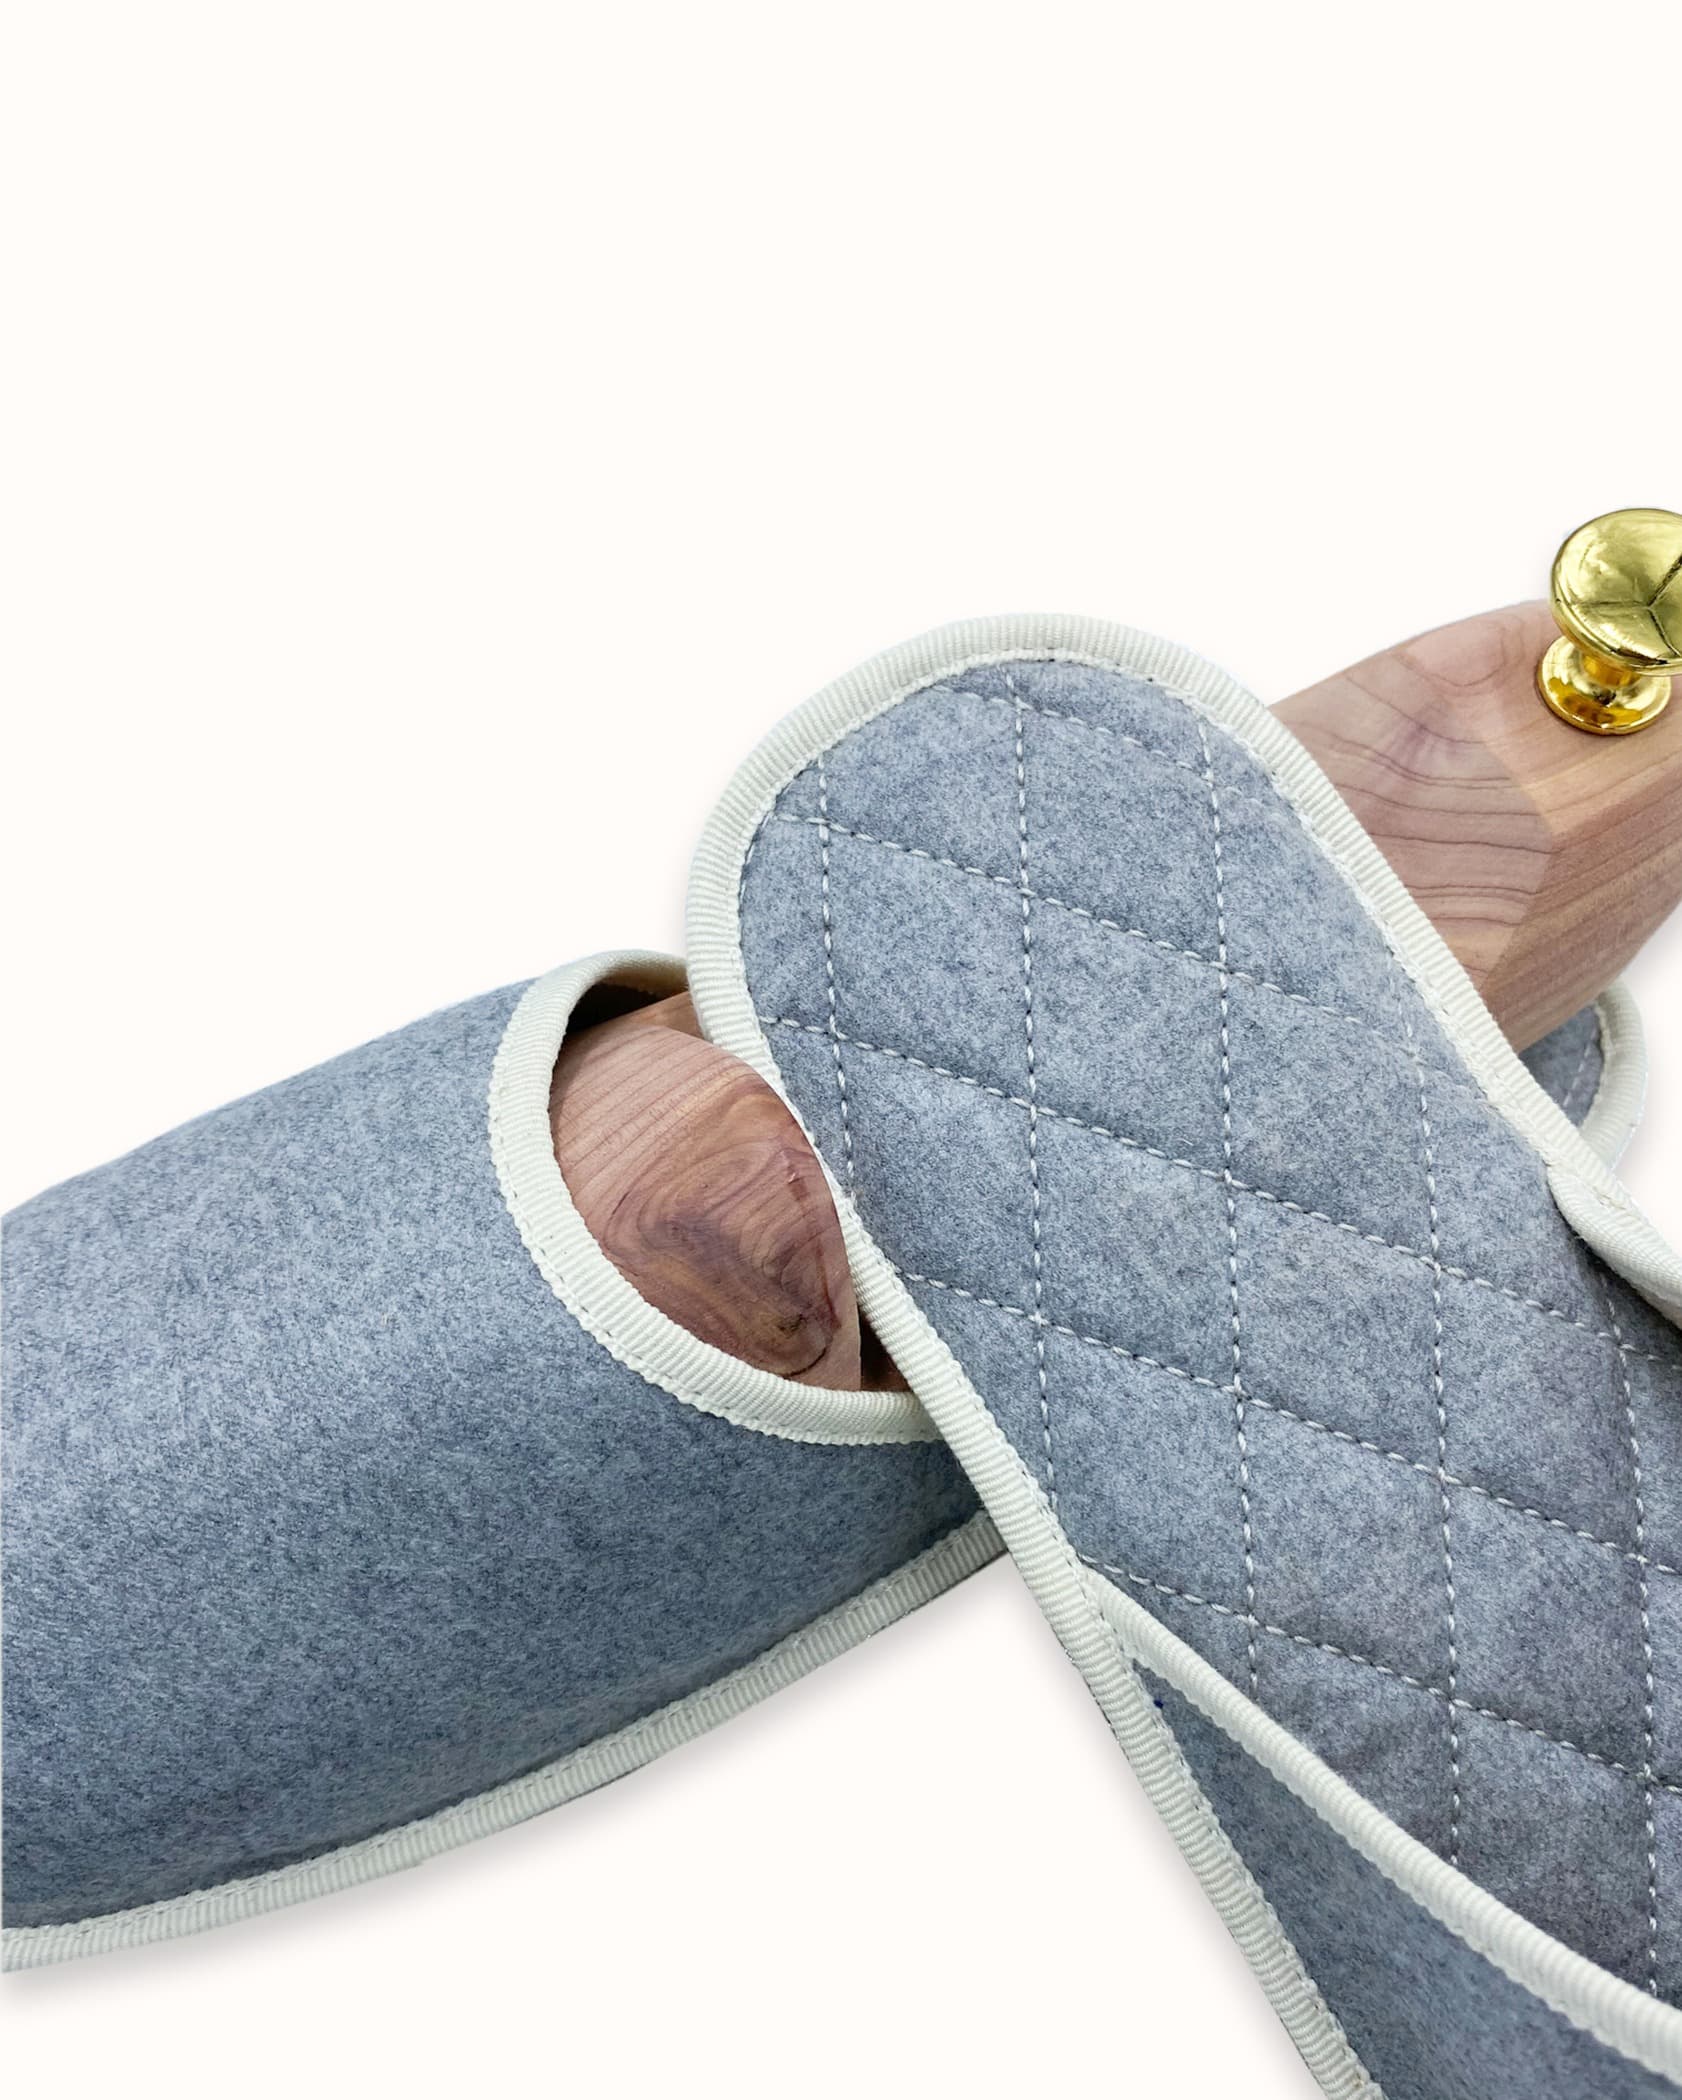 French slippers for men, women and kids. Le Spleen "Comme un Ouragan", blue and white. A slip-on like hotel slippers with a quilted padding and an outstanding craftsmanship manufacturing. Made in France.